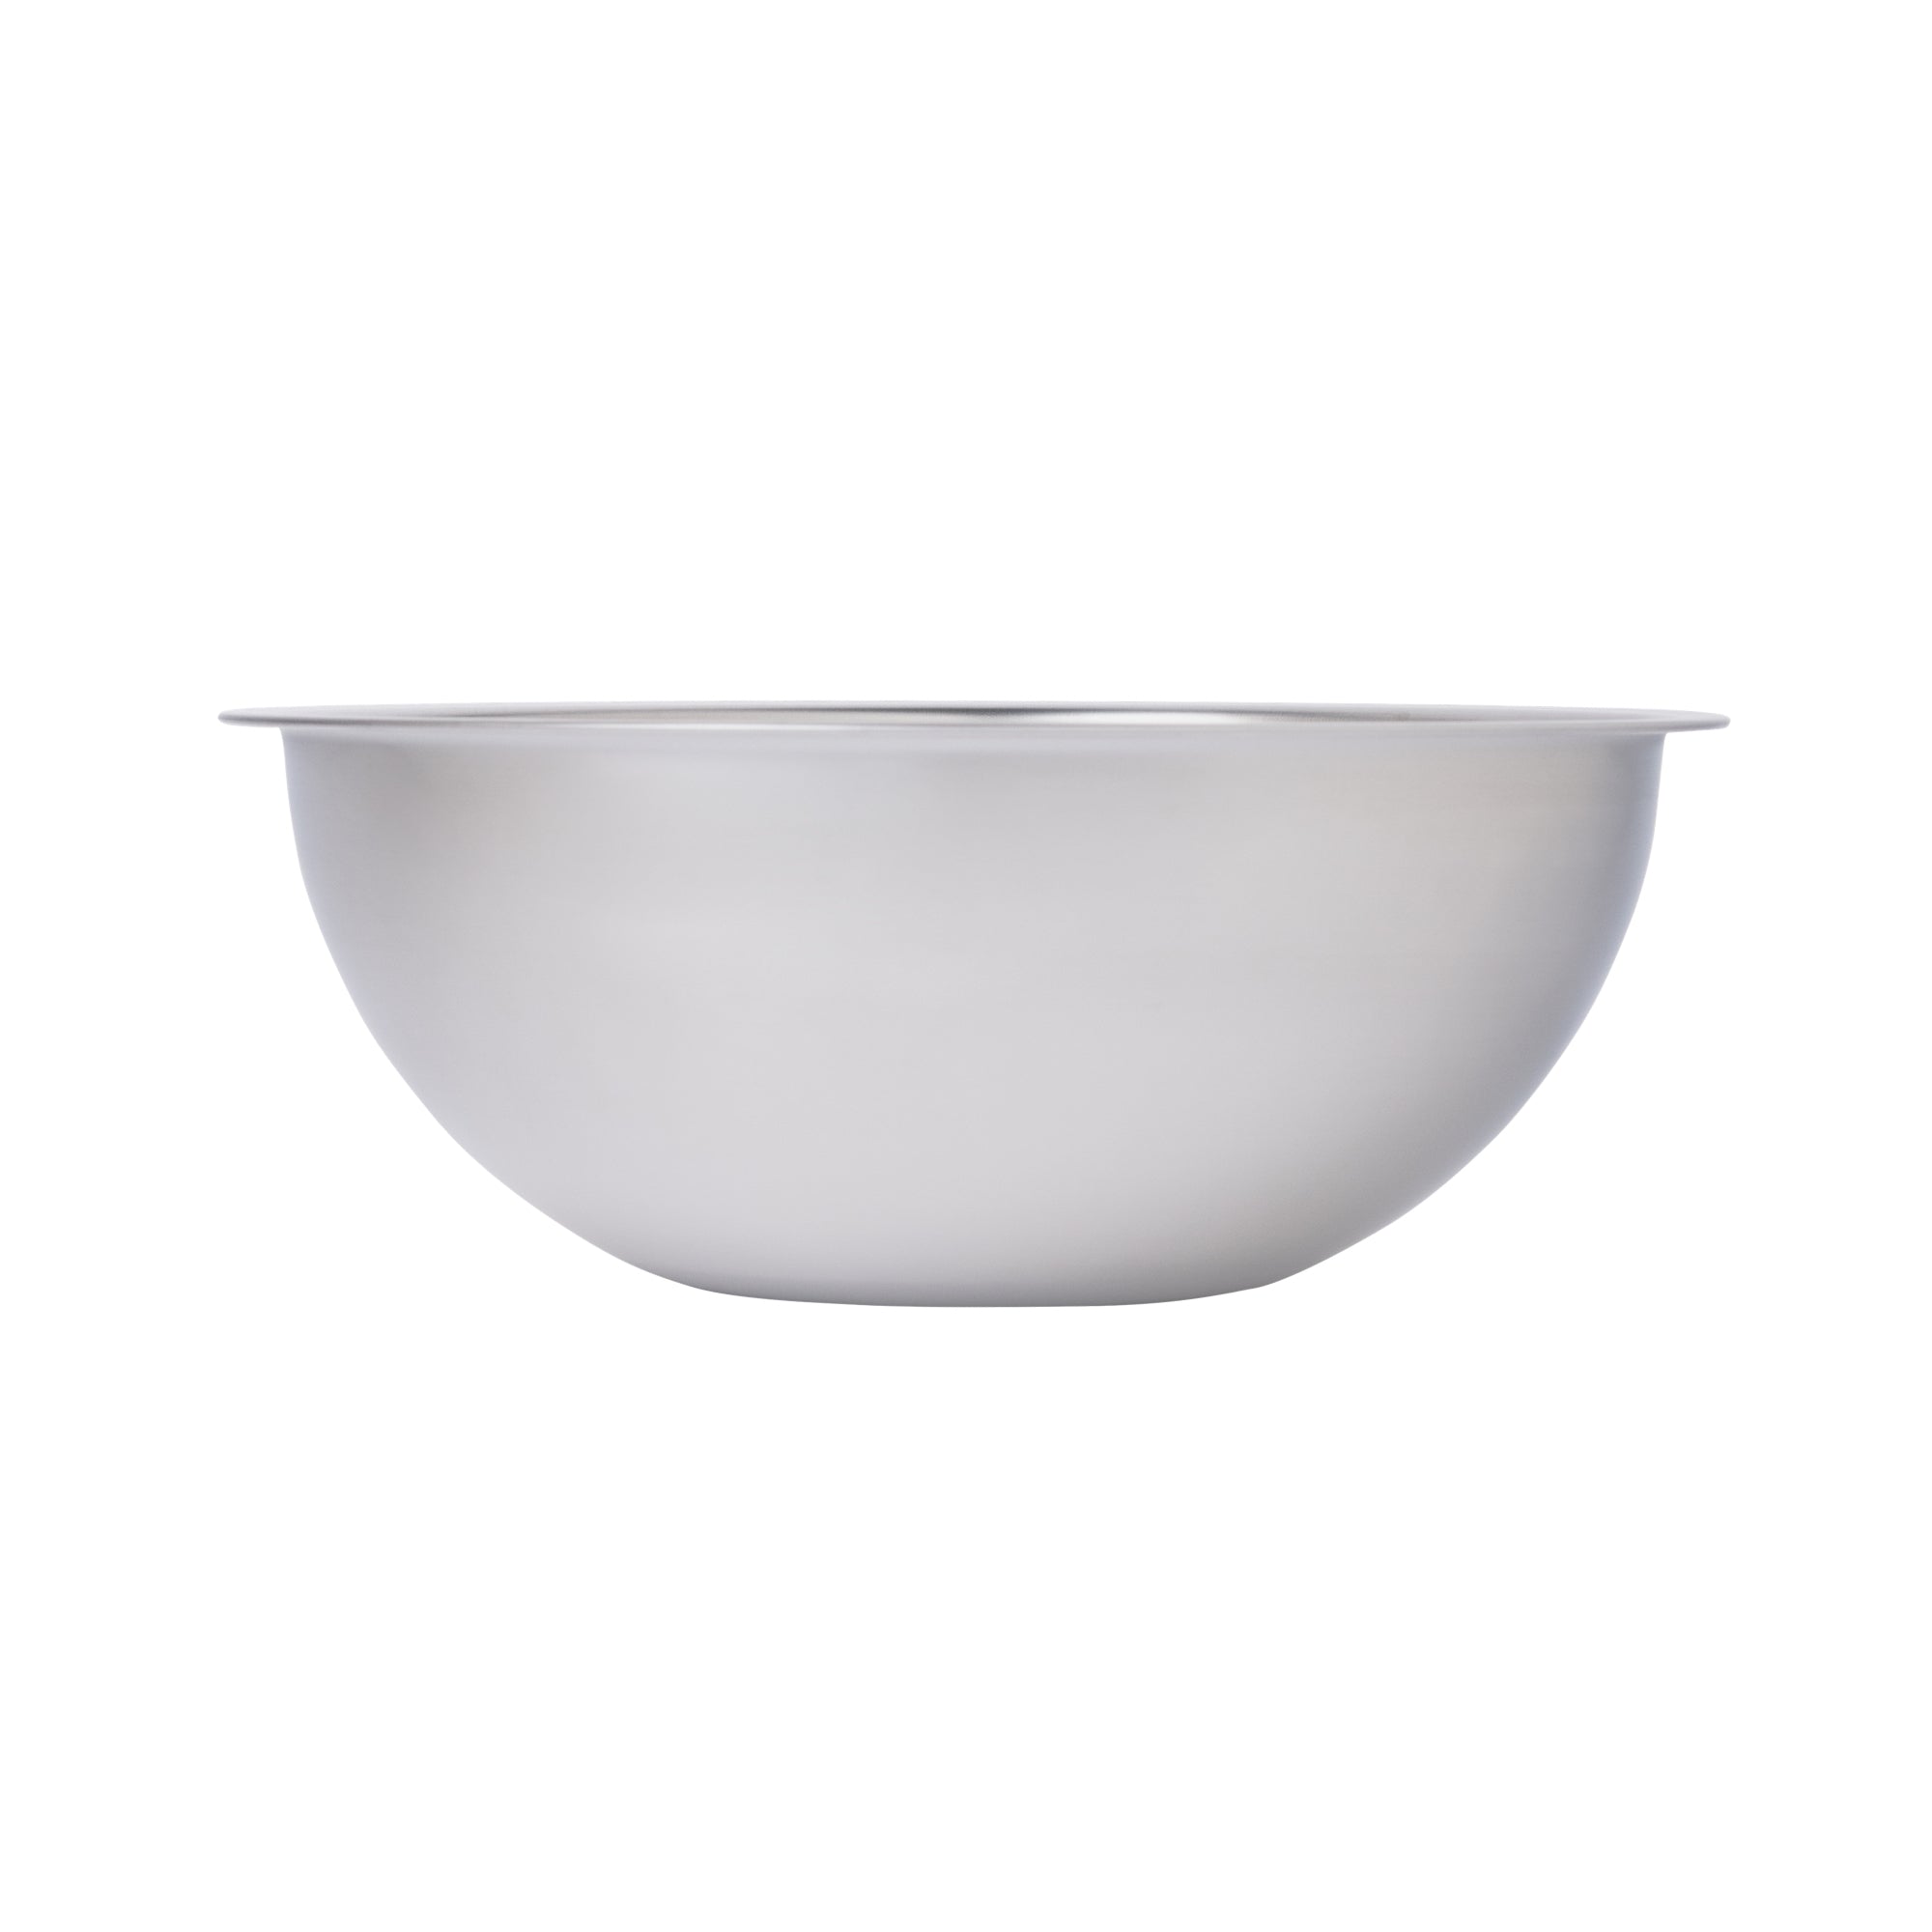 Stainless Steel 3-Quart Bowl + Reviews